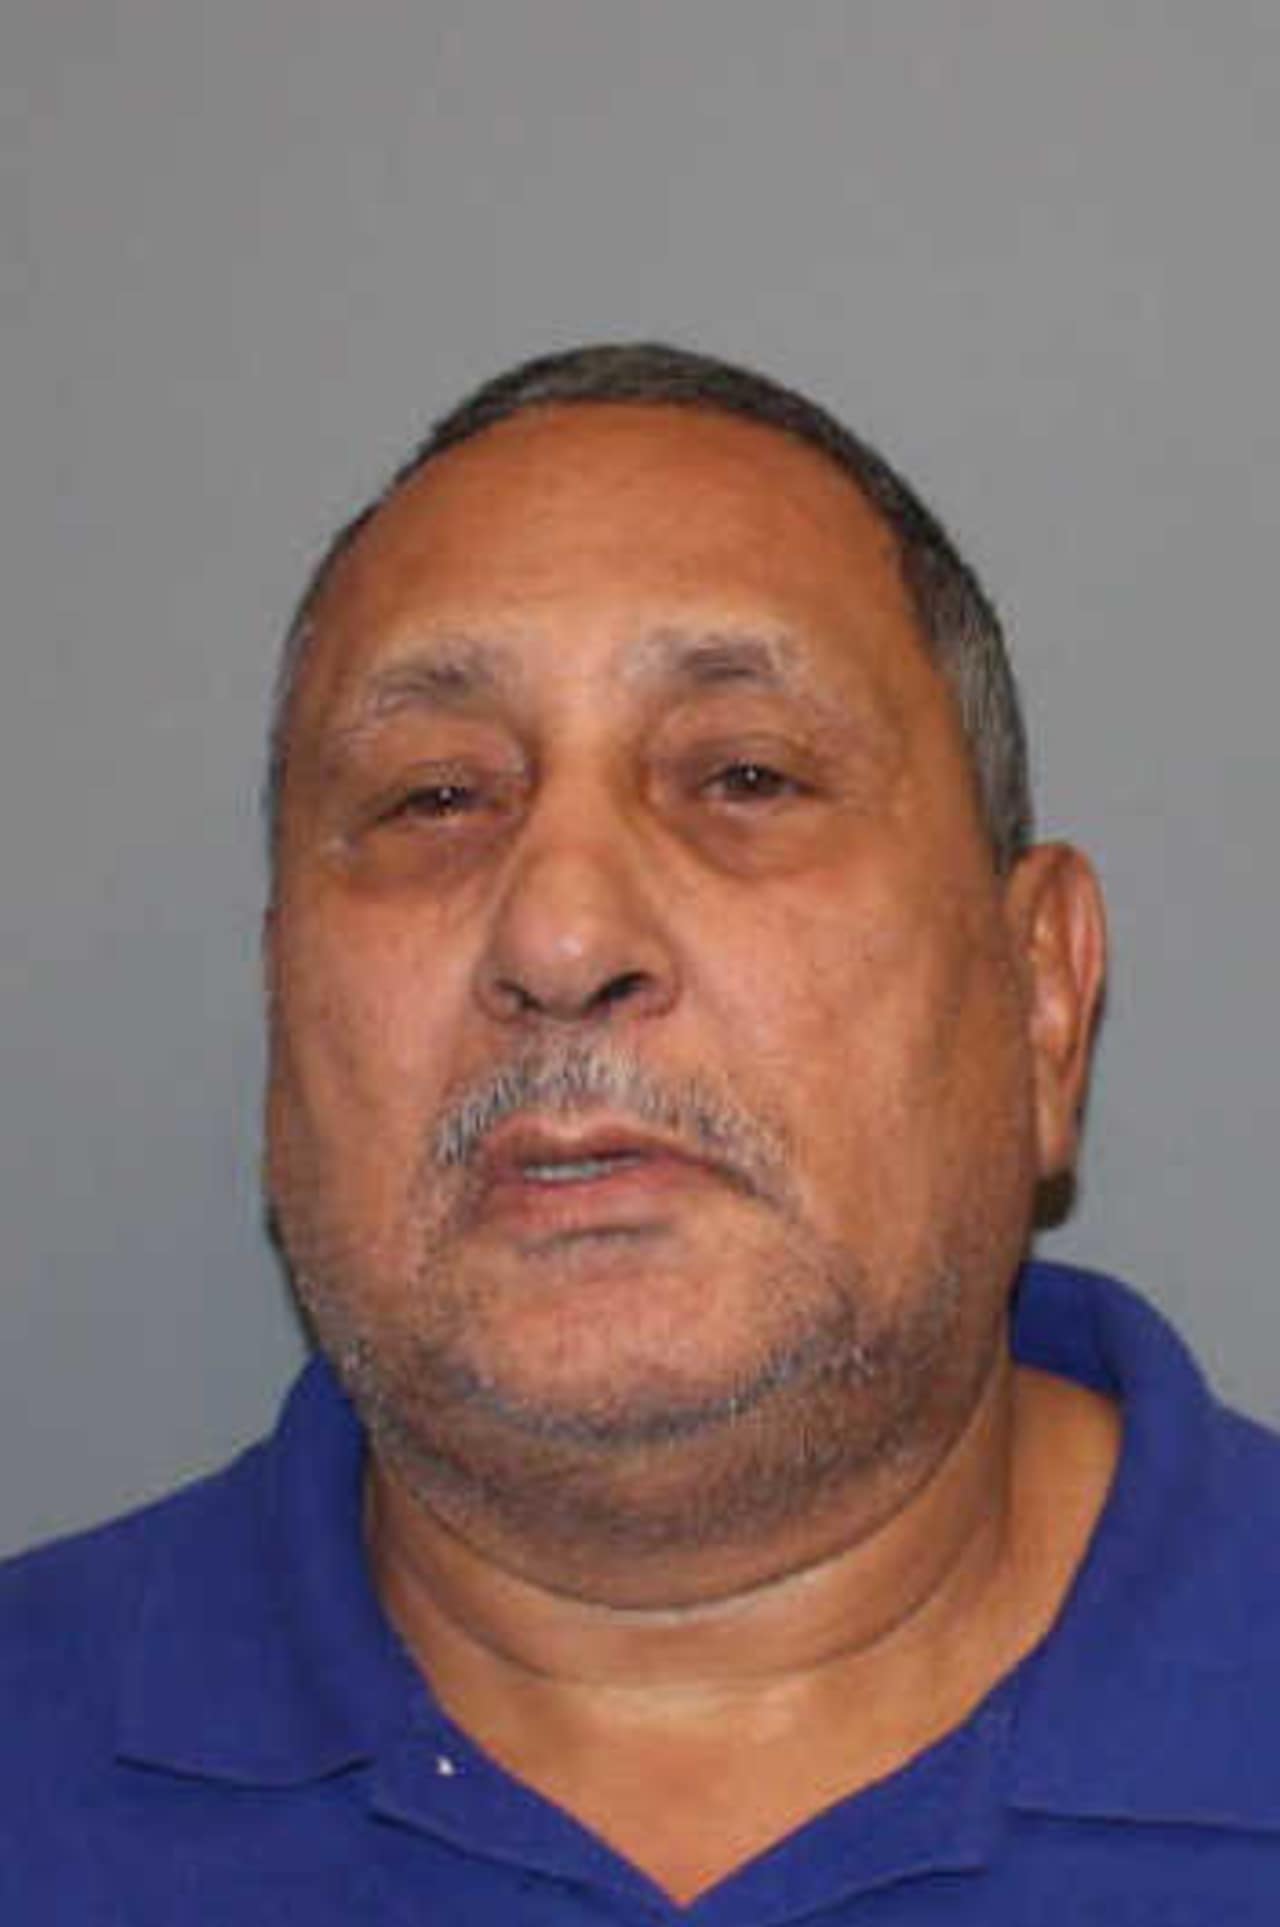 Osvaldo Muniz in 2013, of Bridgeport was charged with first-degree kidnapping and first-degree aggravated sexual assault in connection with an incident that occurred in Norwalk in 1988.